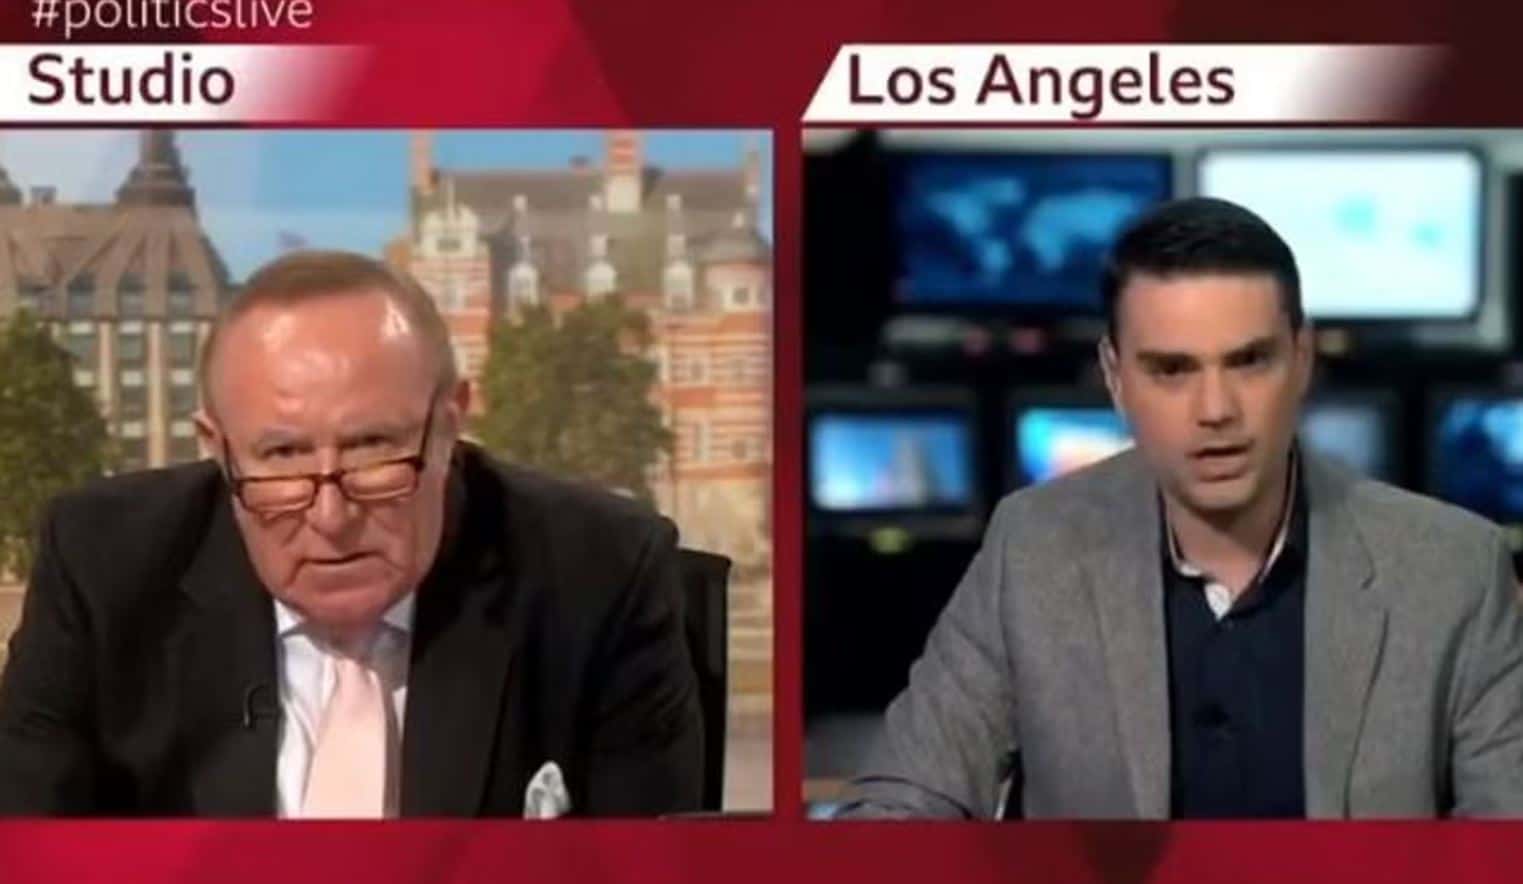 Classic: Andrew Neil accused of being left-wing in explosive interview with Ben Shapiro